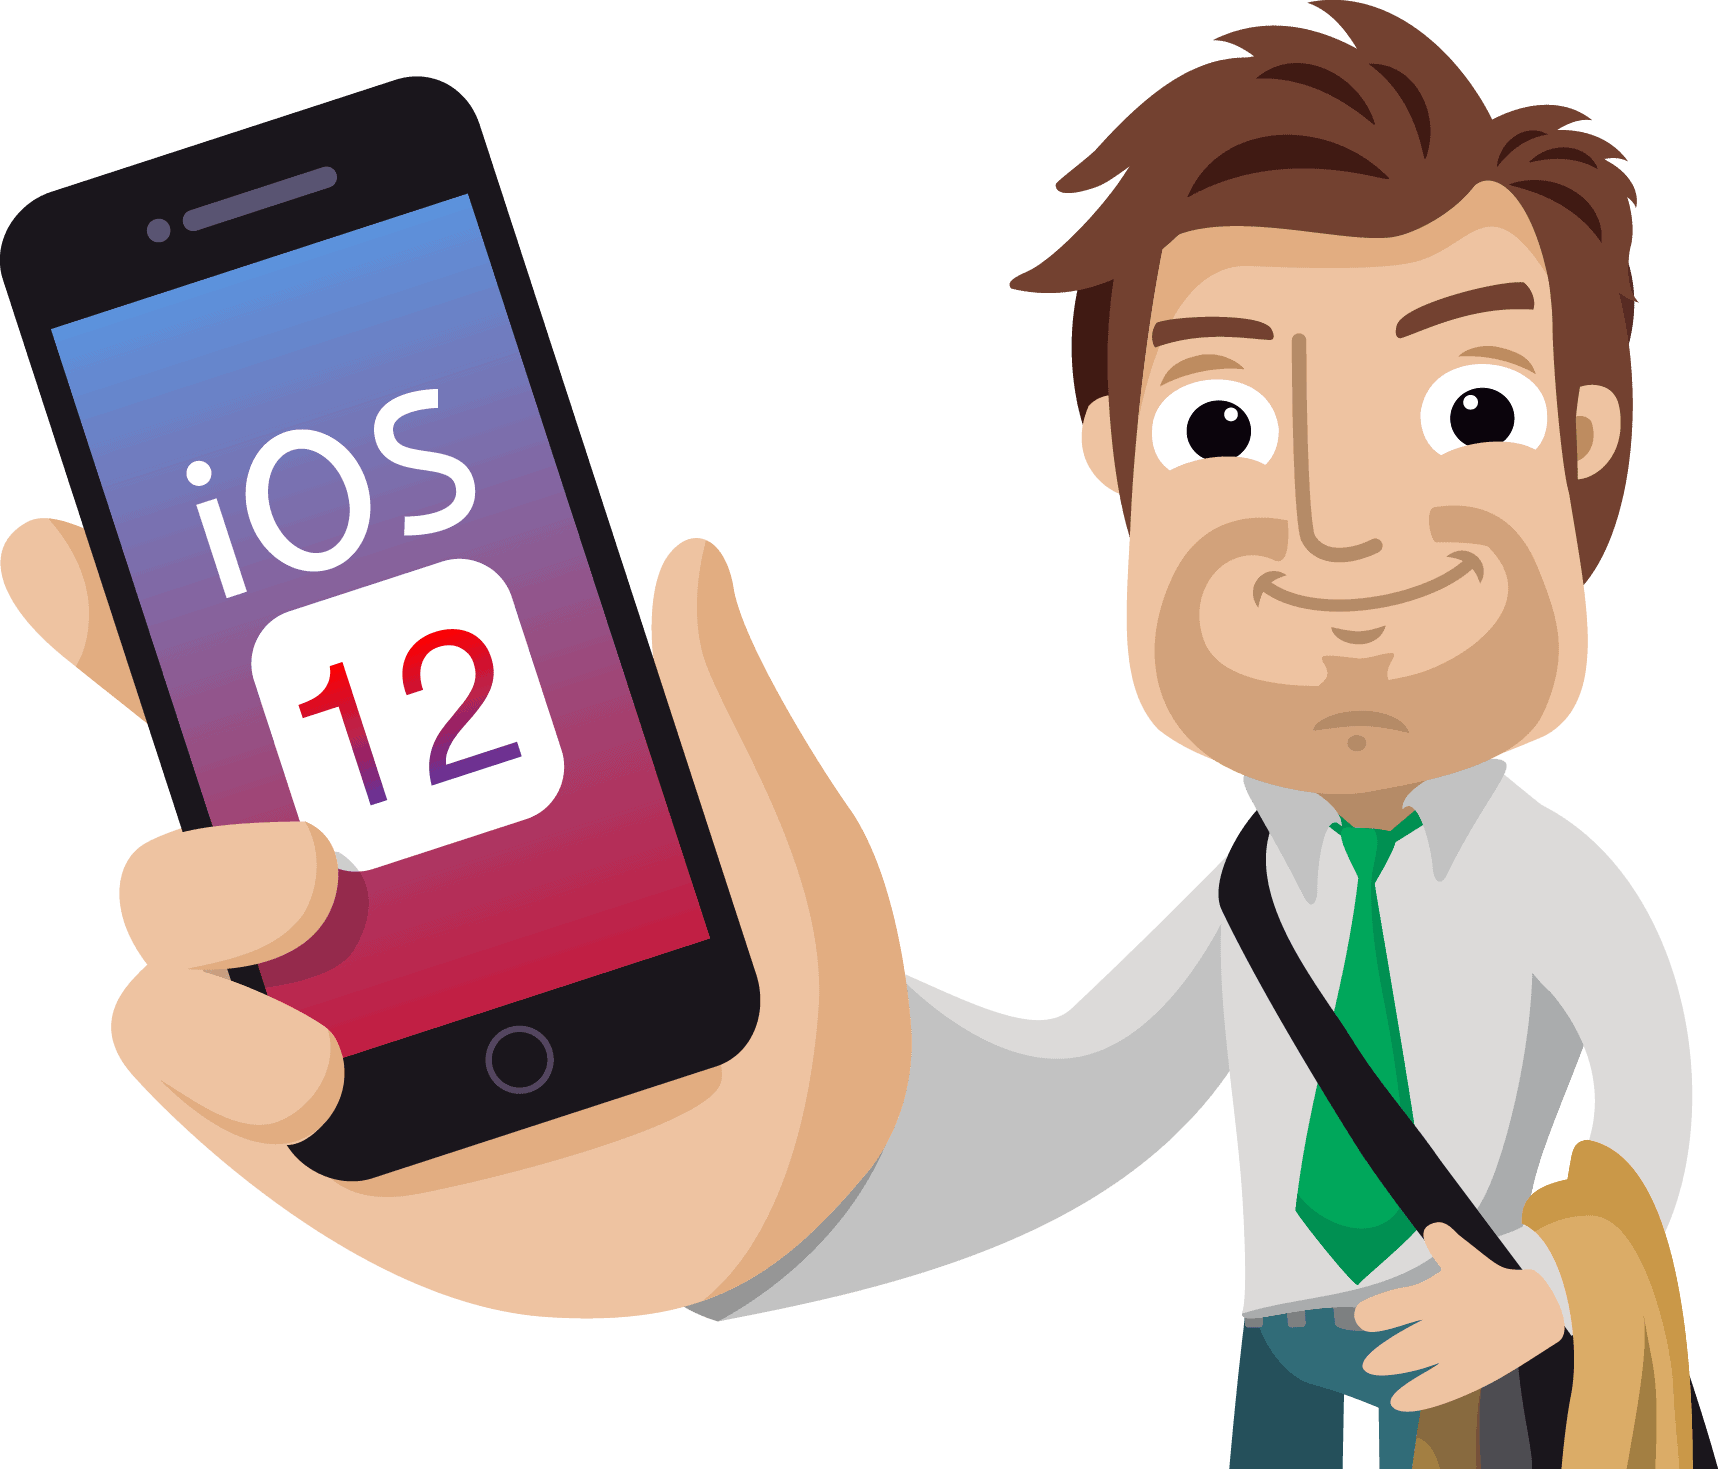 iPhone 7 iOS 12 update: Release date and rumored features